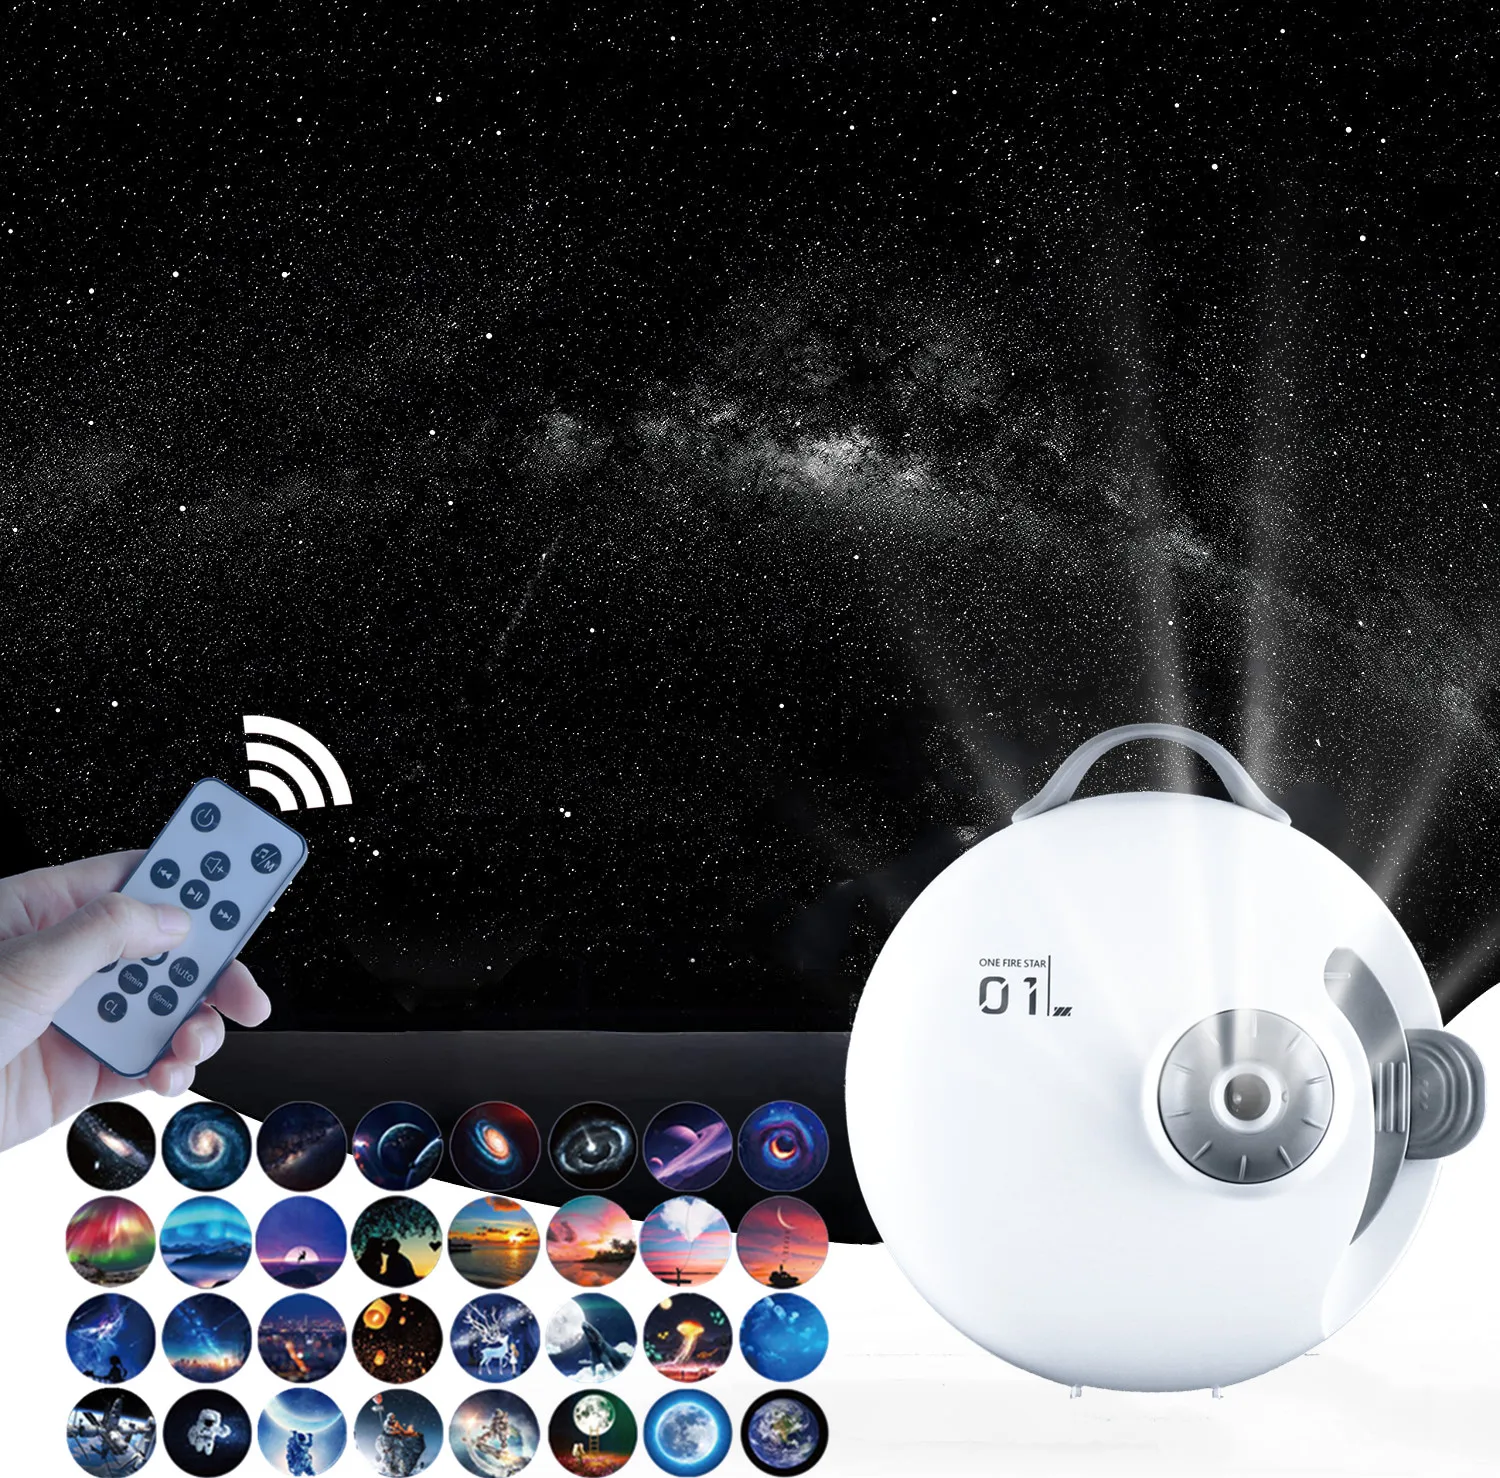 32 in 1 Galaxy Planetarium Projector Starry Sky Night Light with Bluetooth Star Projector LED Lamp for Kids Ceiling Room Decor